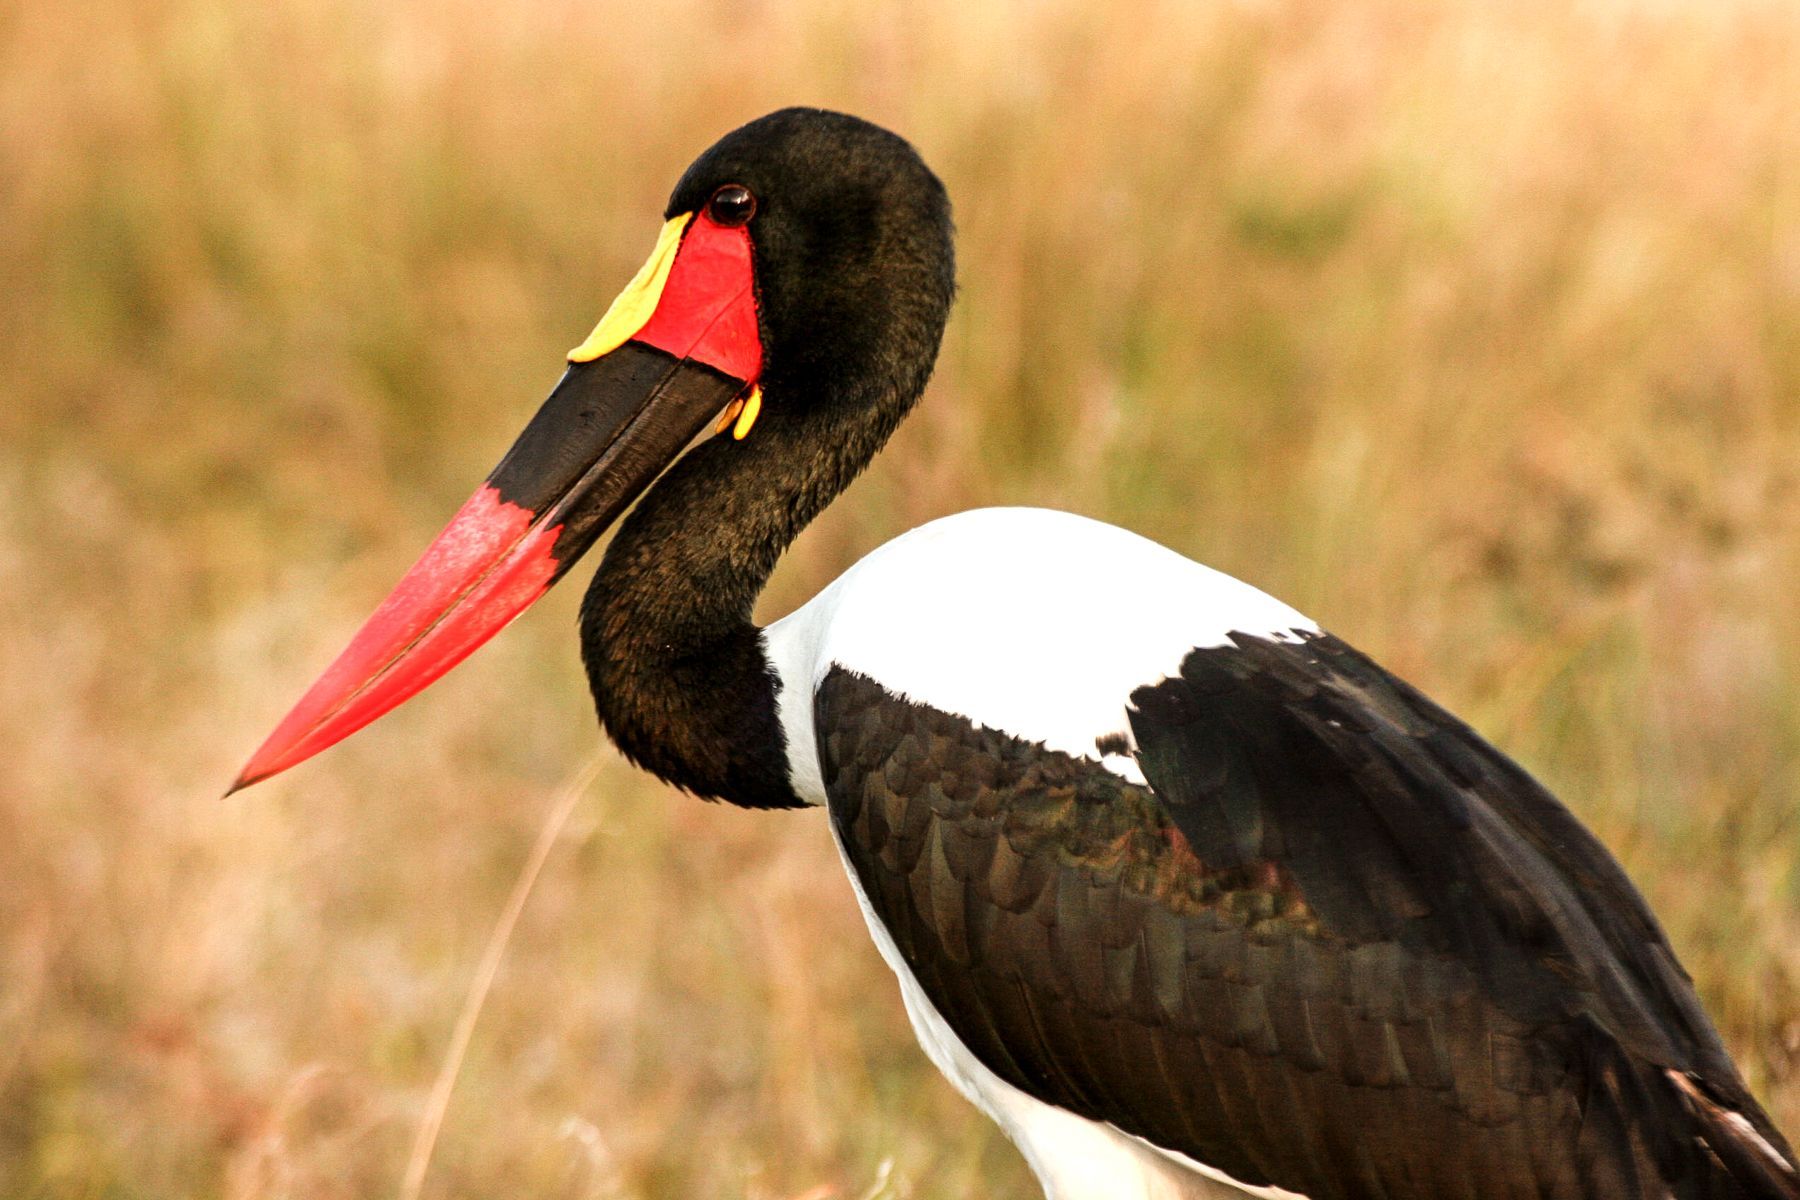 Saddle-billed Storks are as striking as any mammal